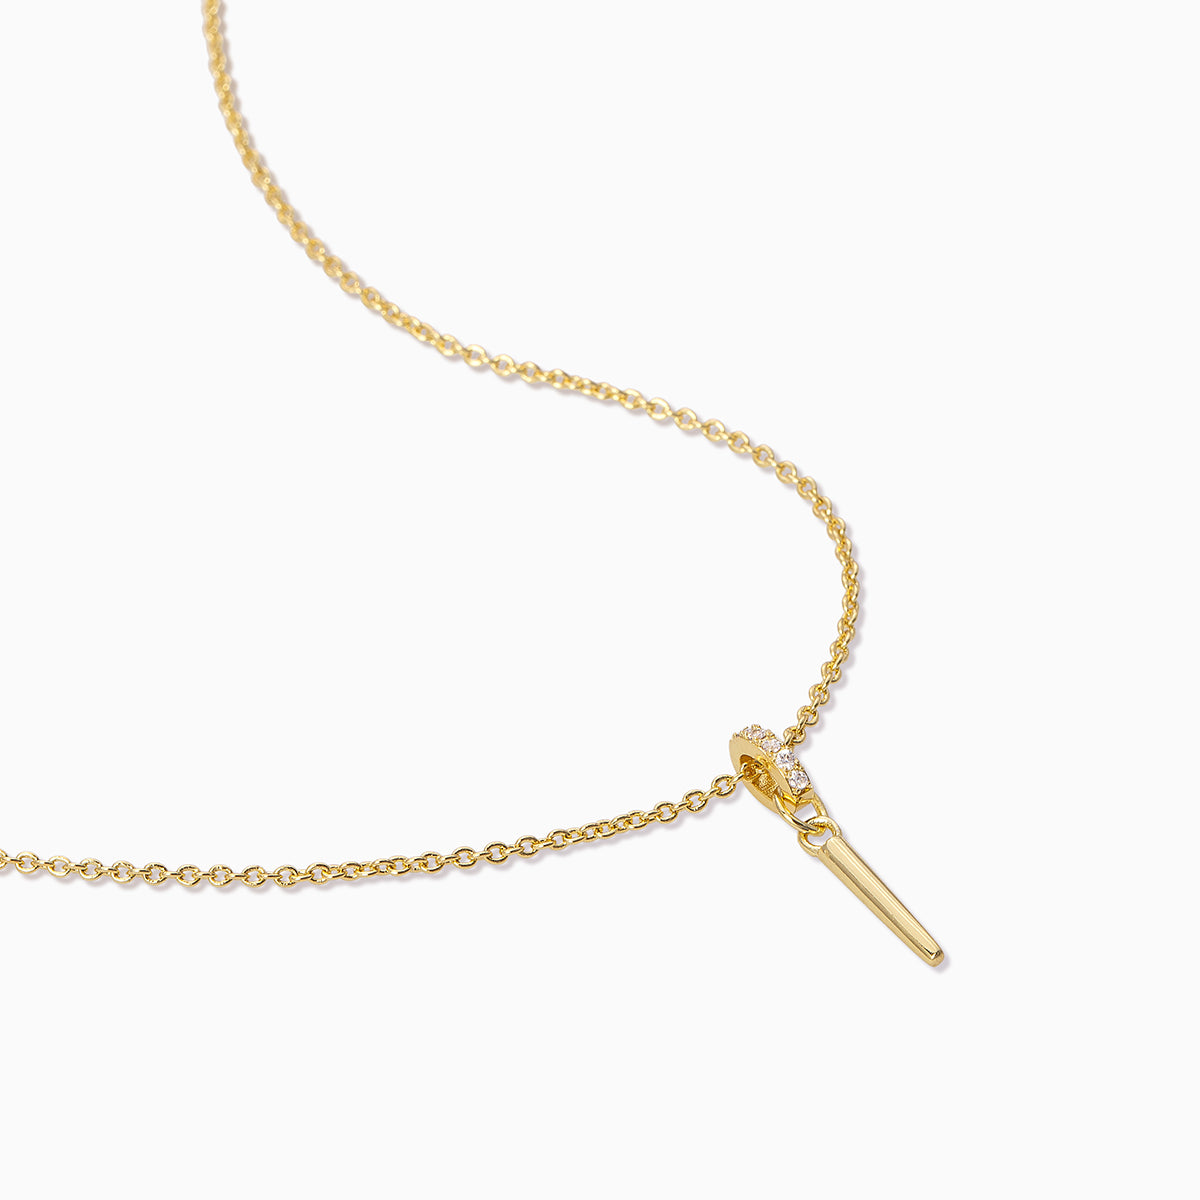 Move On Pendant Necklace | Gold | Product Detail Image | Uncommon James